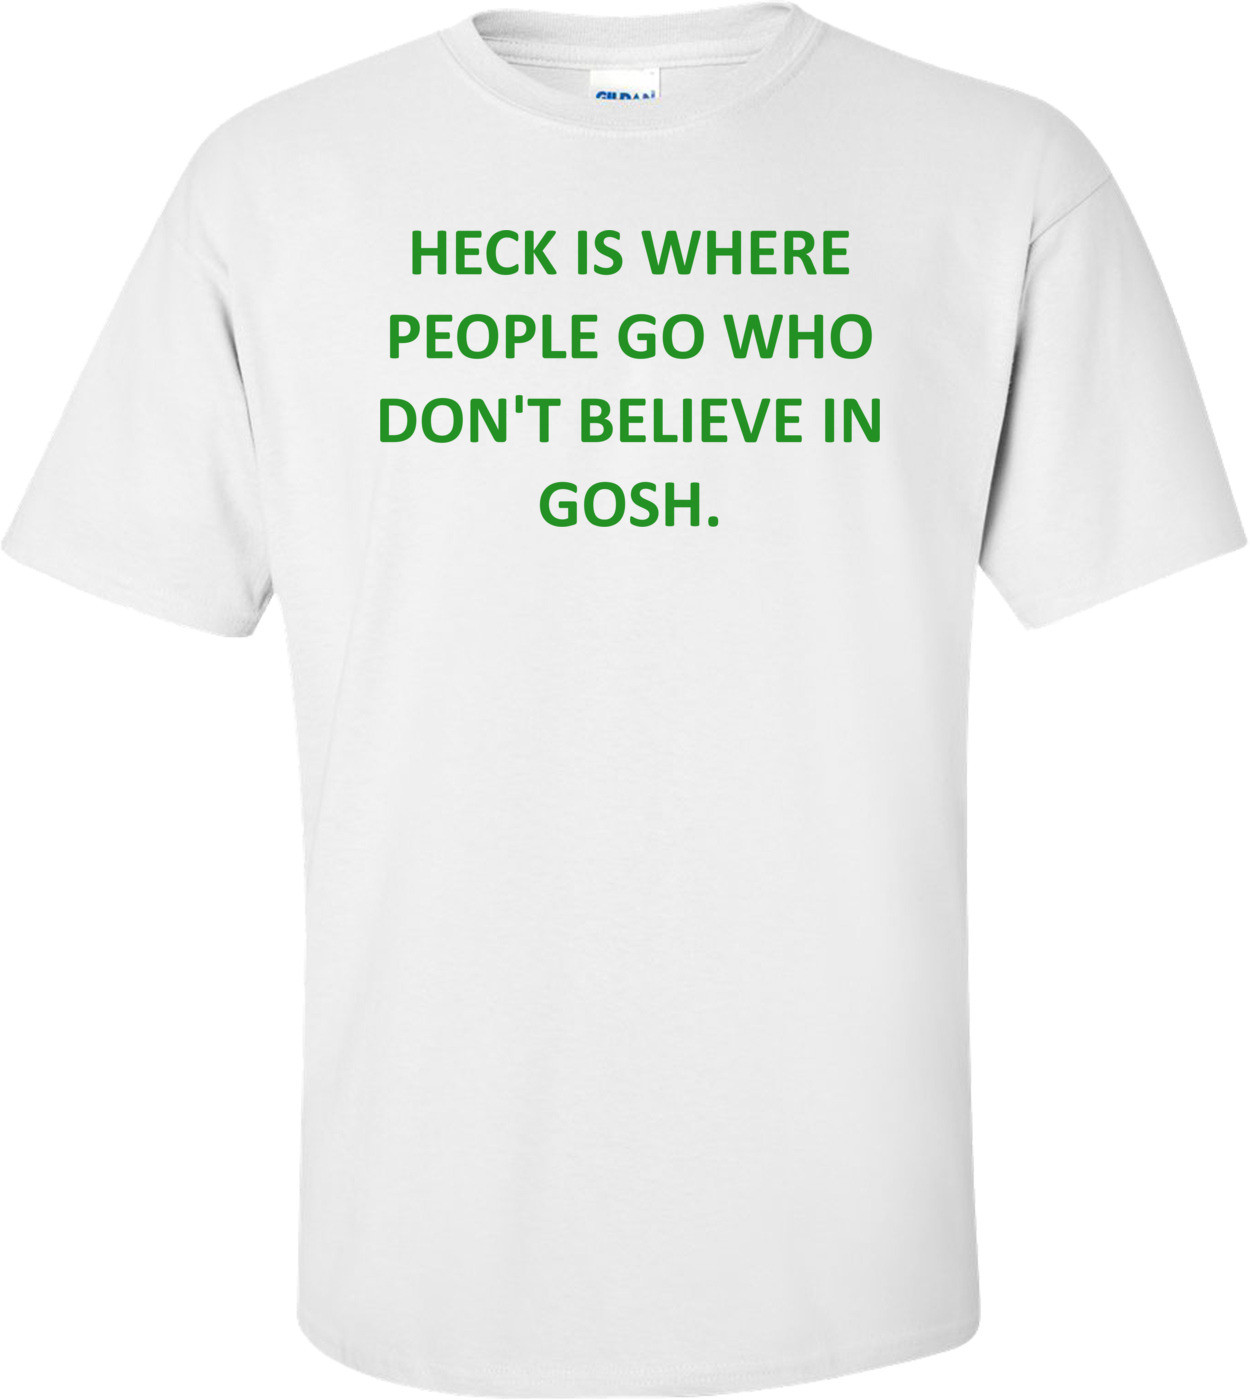 HECK IS WHERE PEOPLE GO WHO DON'T BELIEVE IN GOSH. Shirt